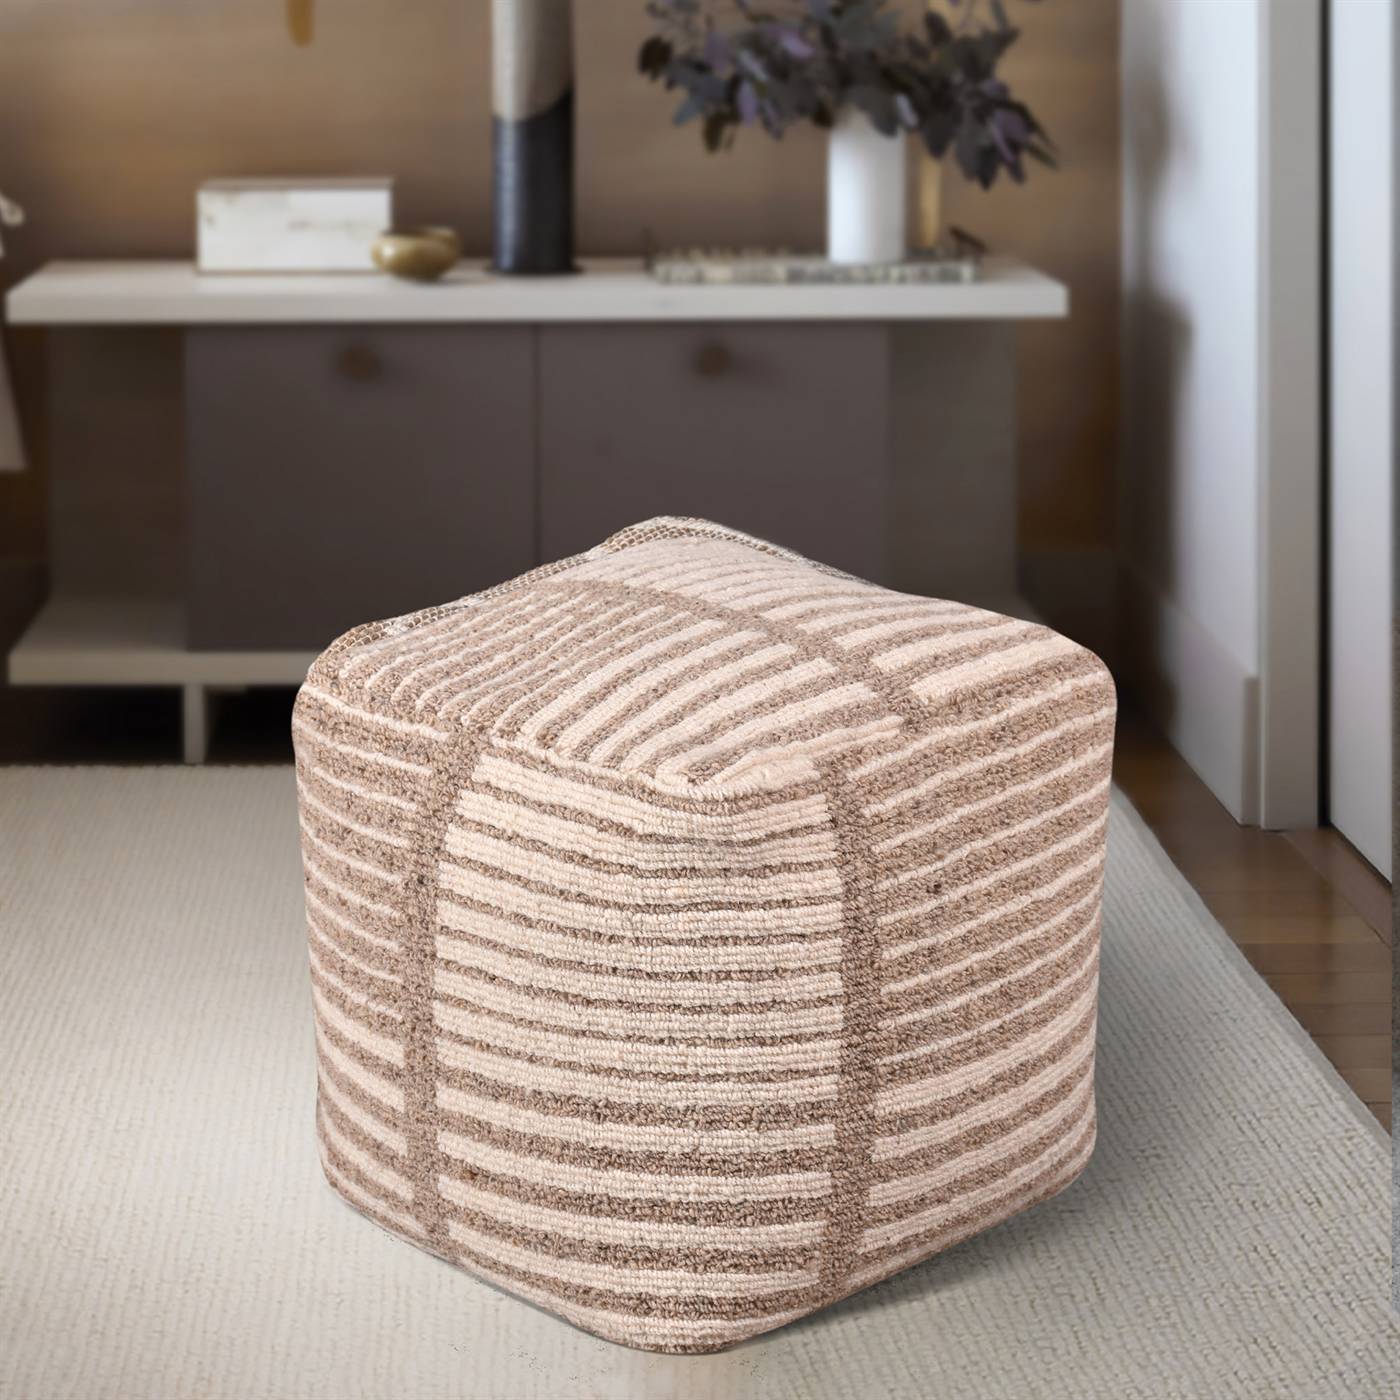 Henke Pouf, 40x40x40 cm, Natural White, Beige, Wool, Hand Woven, Handwoven, All Loop